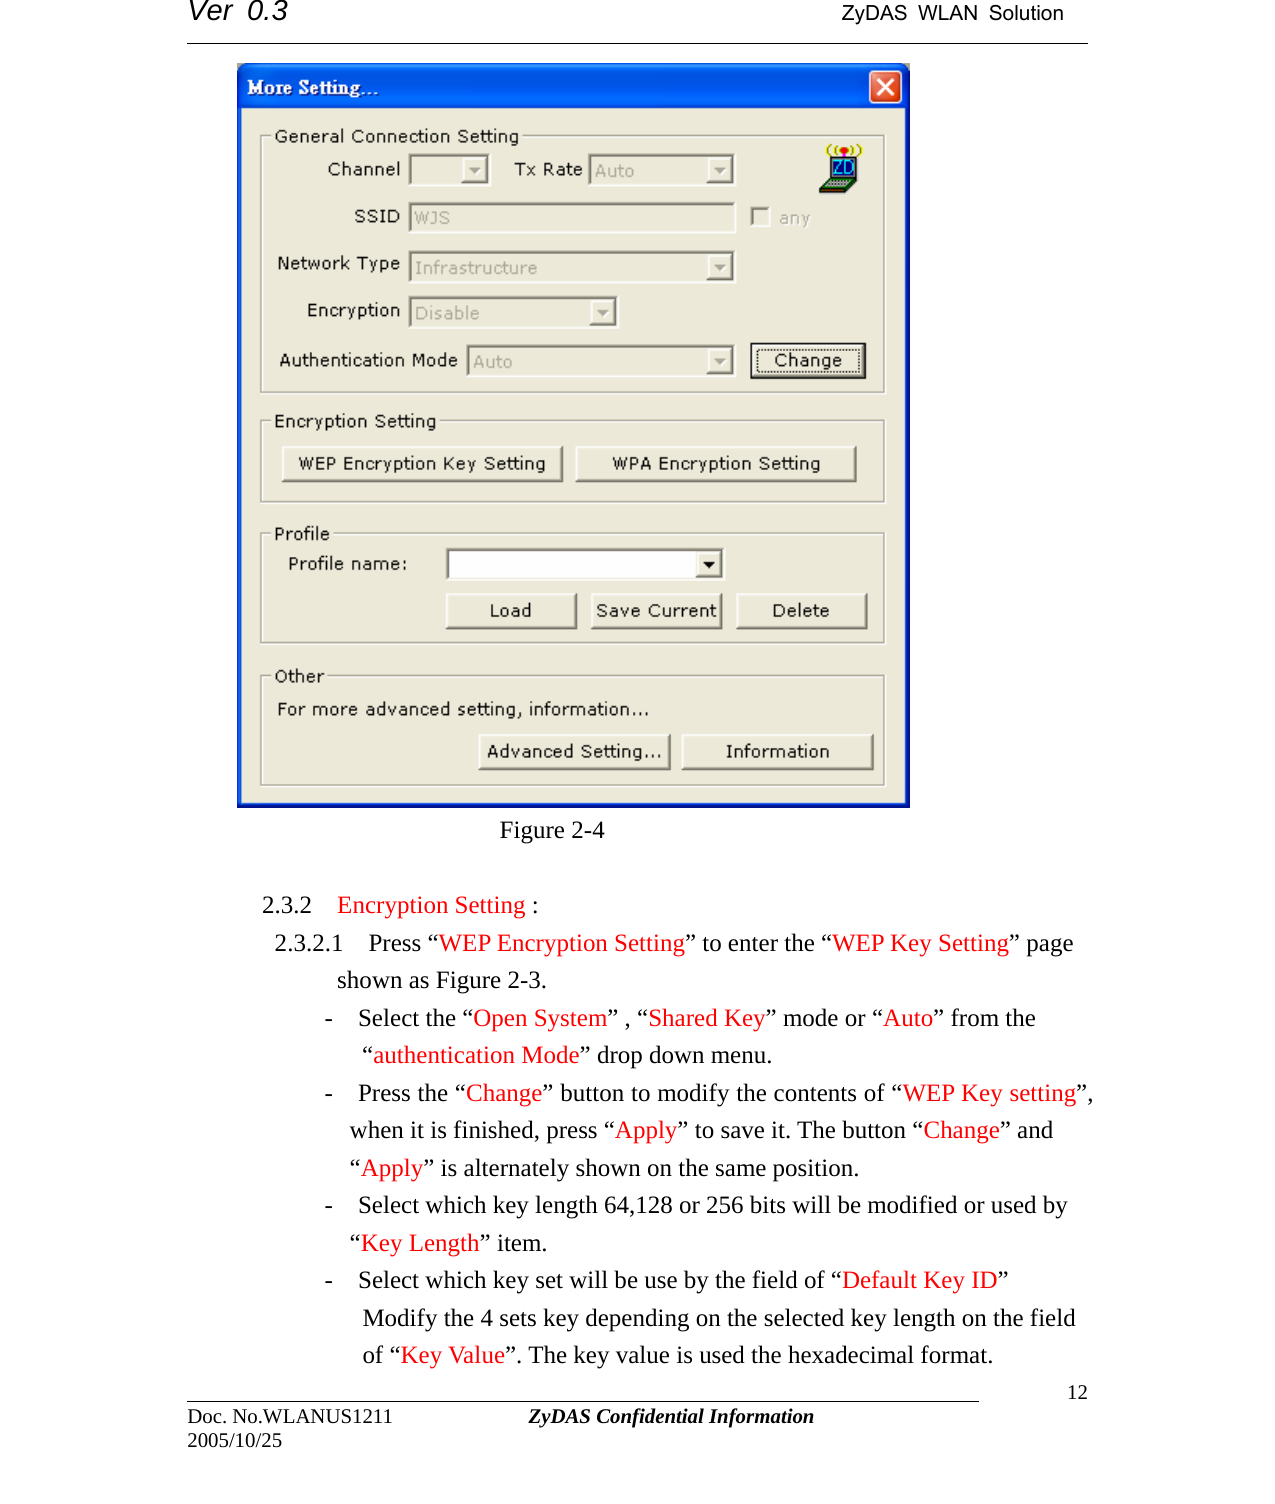 Ver 0.3                                      ZyDAS WLAN Solution                                                                                                                                            Figure 2-4  2.3.2 Encryption Setting :                                                                                Doc. No.WLANUS1211             ZyDAS Confidential Information                   12 2005/10/25    2.3.2.1  Press “WEP Encryption Setting” to enter the “WEP Key Setting” page shown as Figure 2-3.        -  Select the “Open System” , “Shared Key” mode or “Auto” from the “authentication Mode” drop down menu. -  Press the “Change” button to modify the contents of “WEP Key setting”, when it is finished, press “Apply” to save it. The button “Change” and “Apply” is alternately shown on the same position. -    Select which key length 64,128 or 256 bits will be modified or used by “Key Length” item. -    Select which key set will be use by the field of “Default Key ID” Modify the 4 sets key depending on the selected key length on the field of “Key Value”. The key value is used the hexadecimal format. 